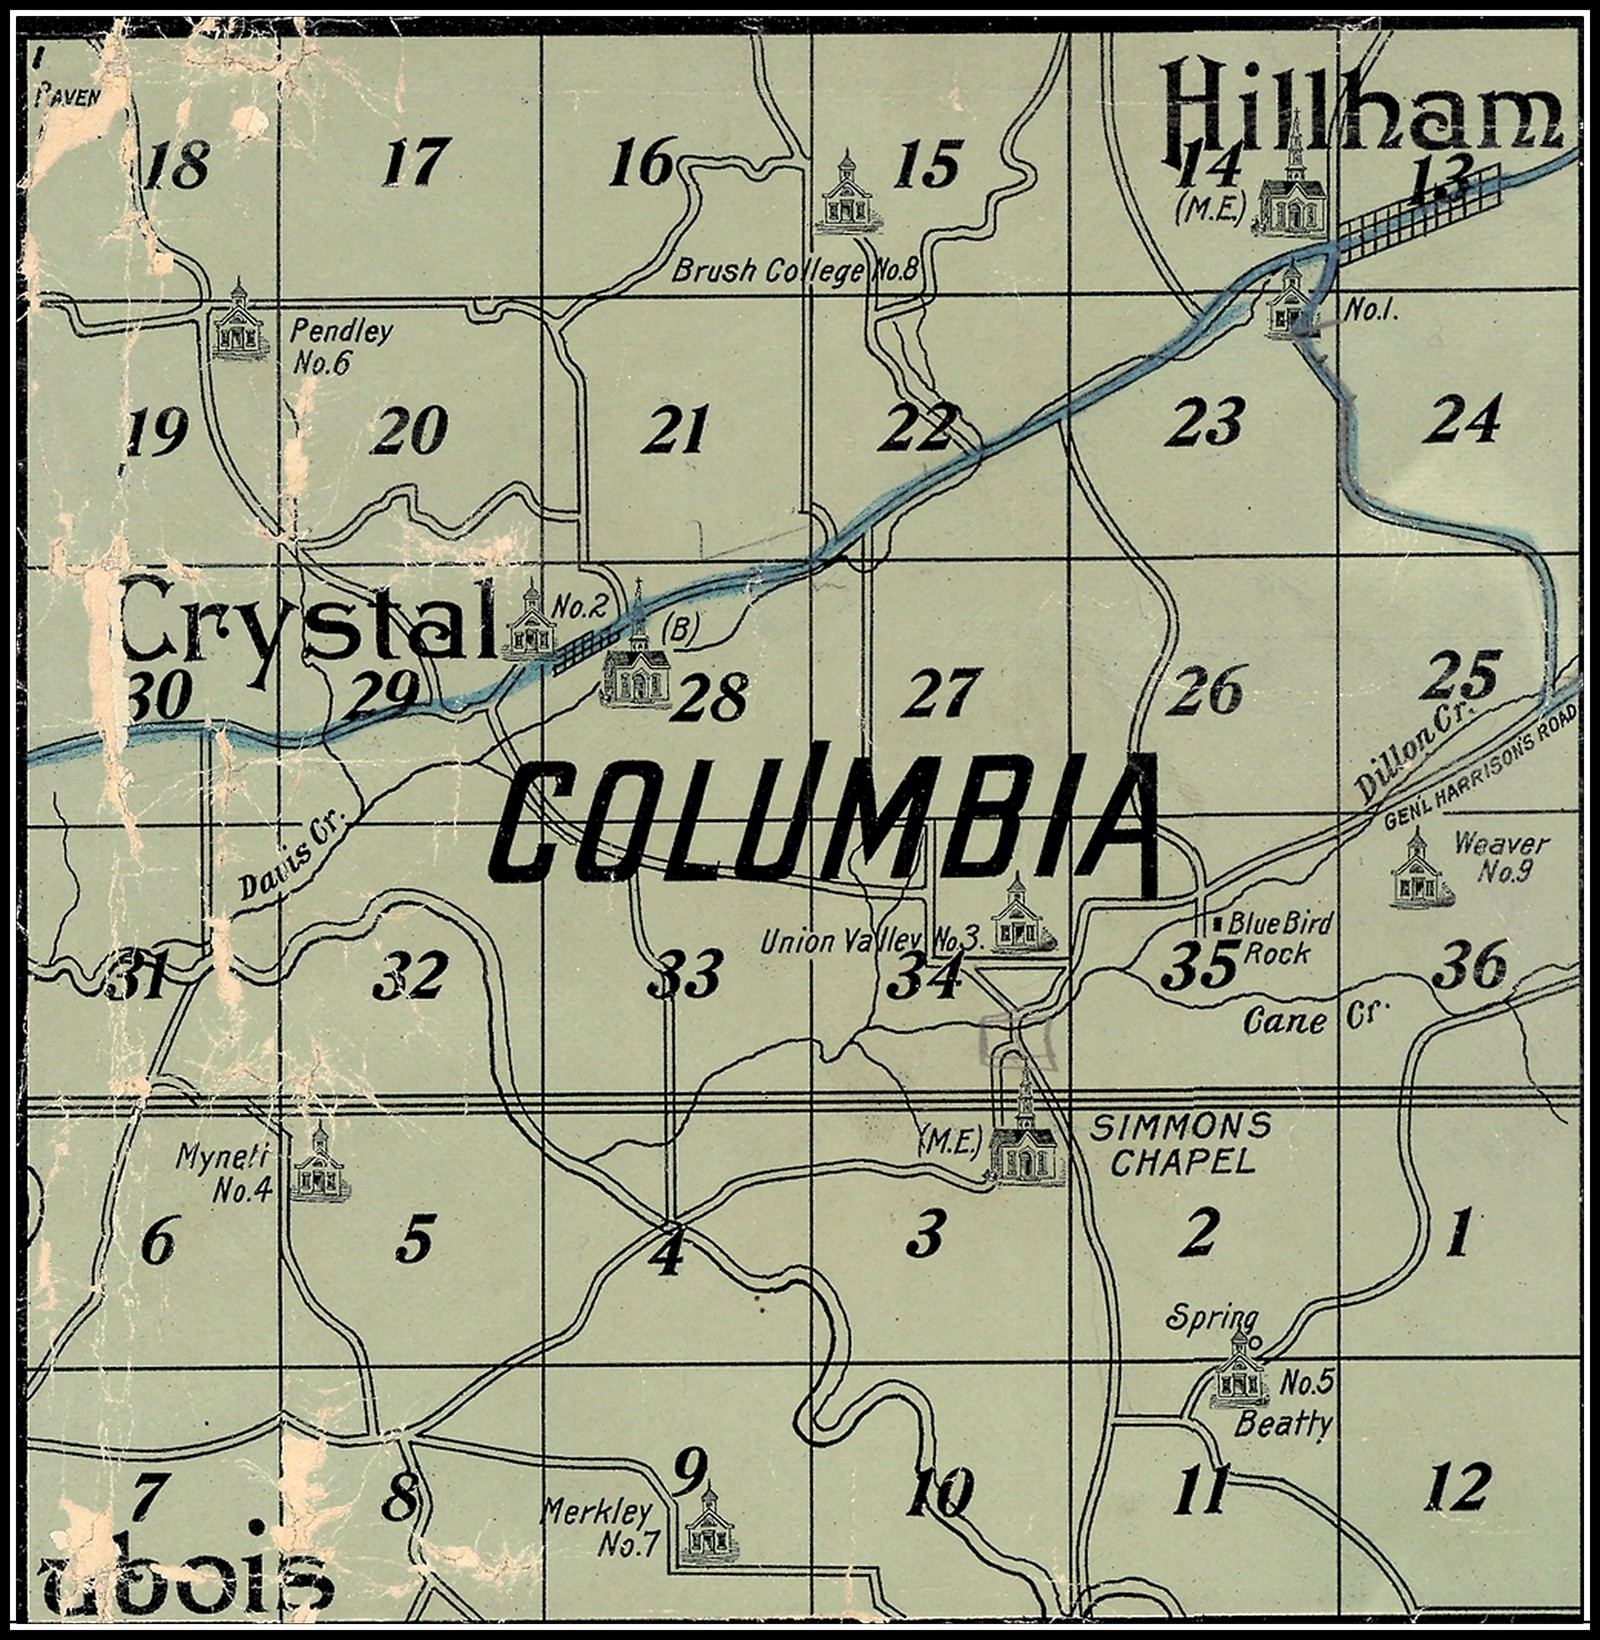 columbia county parcel map